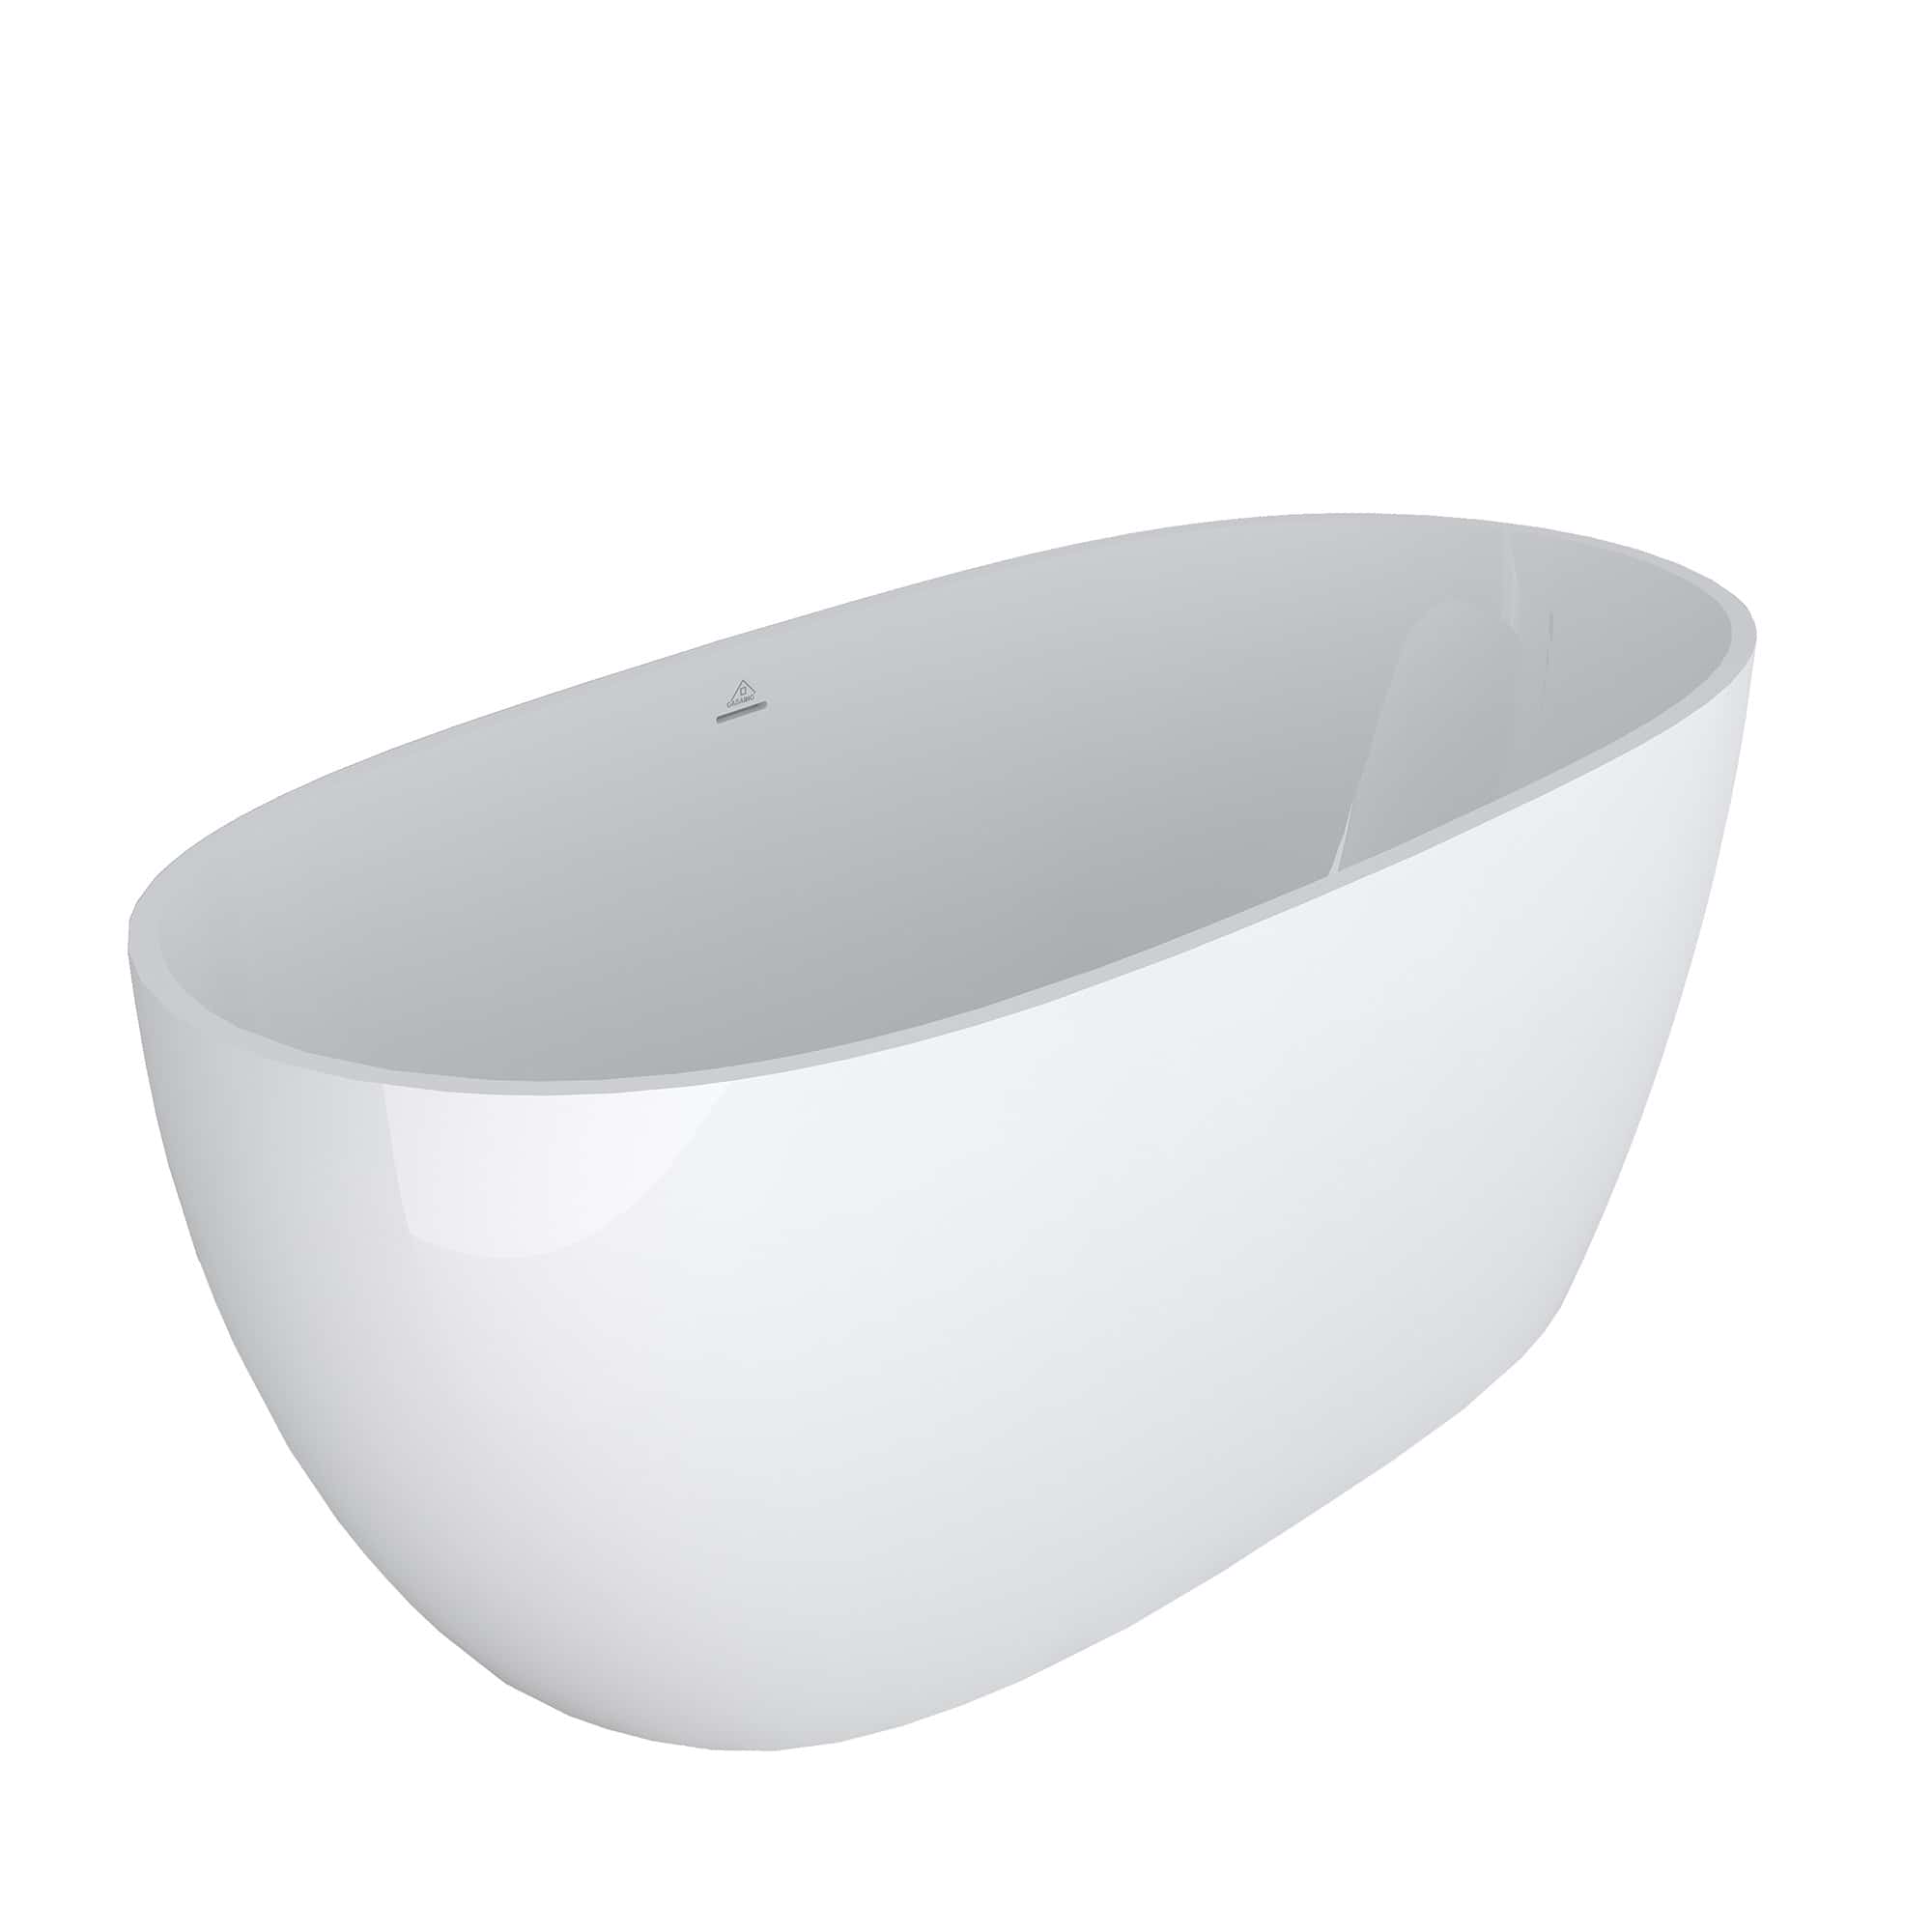 CASAINC 67 inch Glossy White Freestanding Solid Surface Oval Soaking Tub, Stylish Tubs Option with Floor-Level Design